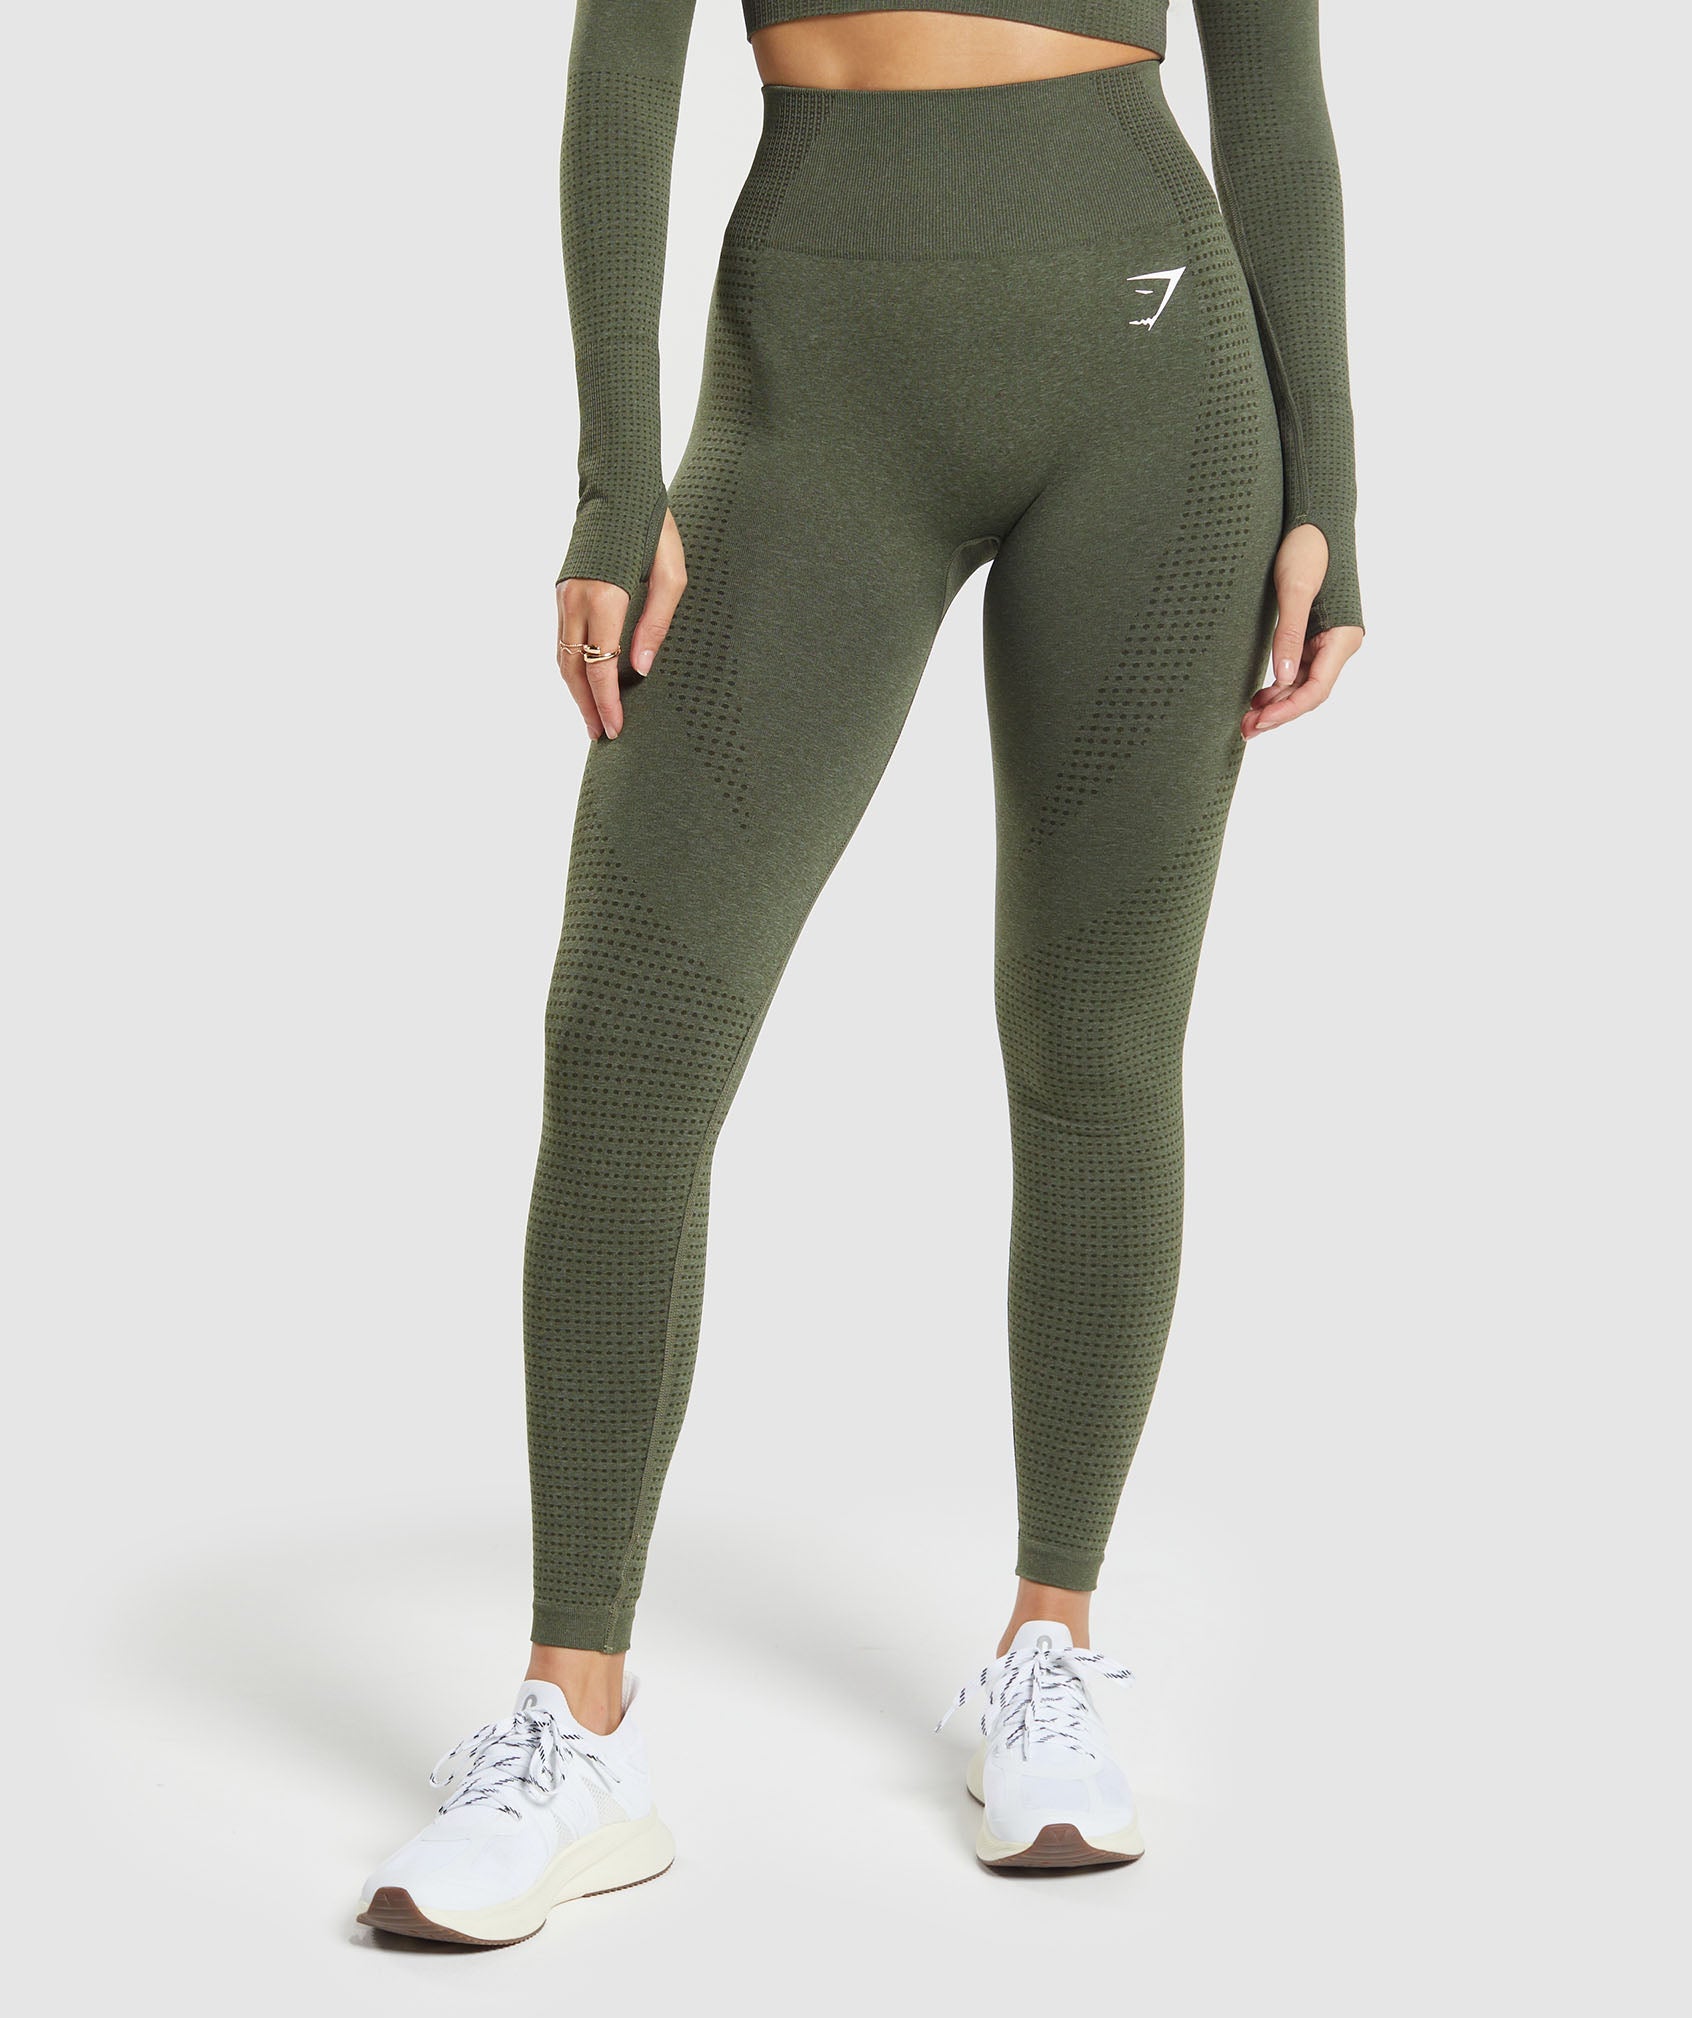 Pin by RLQ on Gymshark  Workout leggings, Workout clothes, Sport outfits